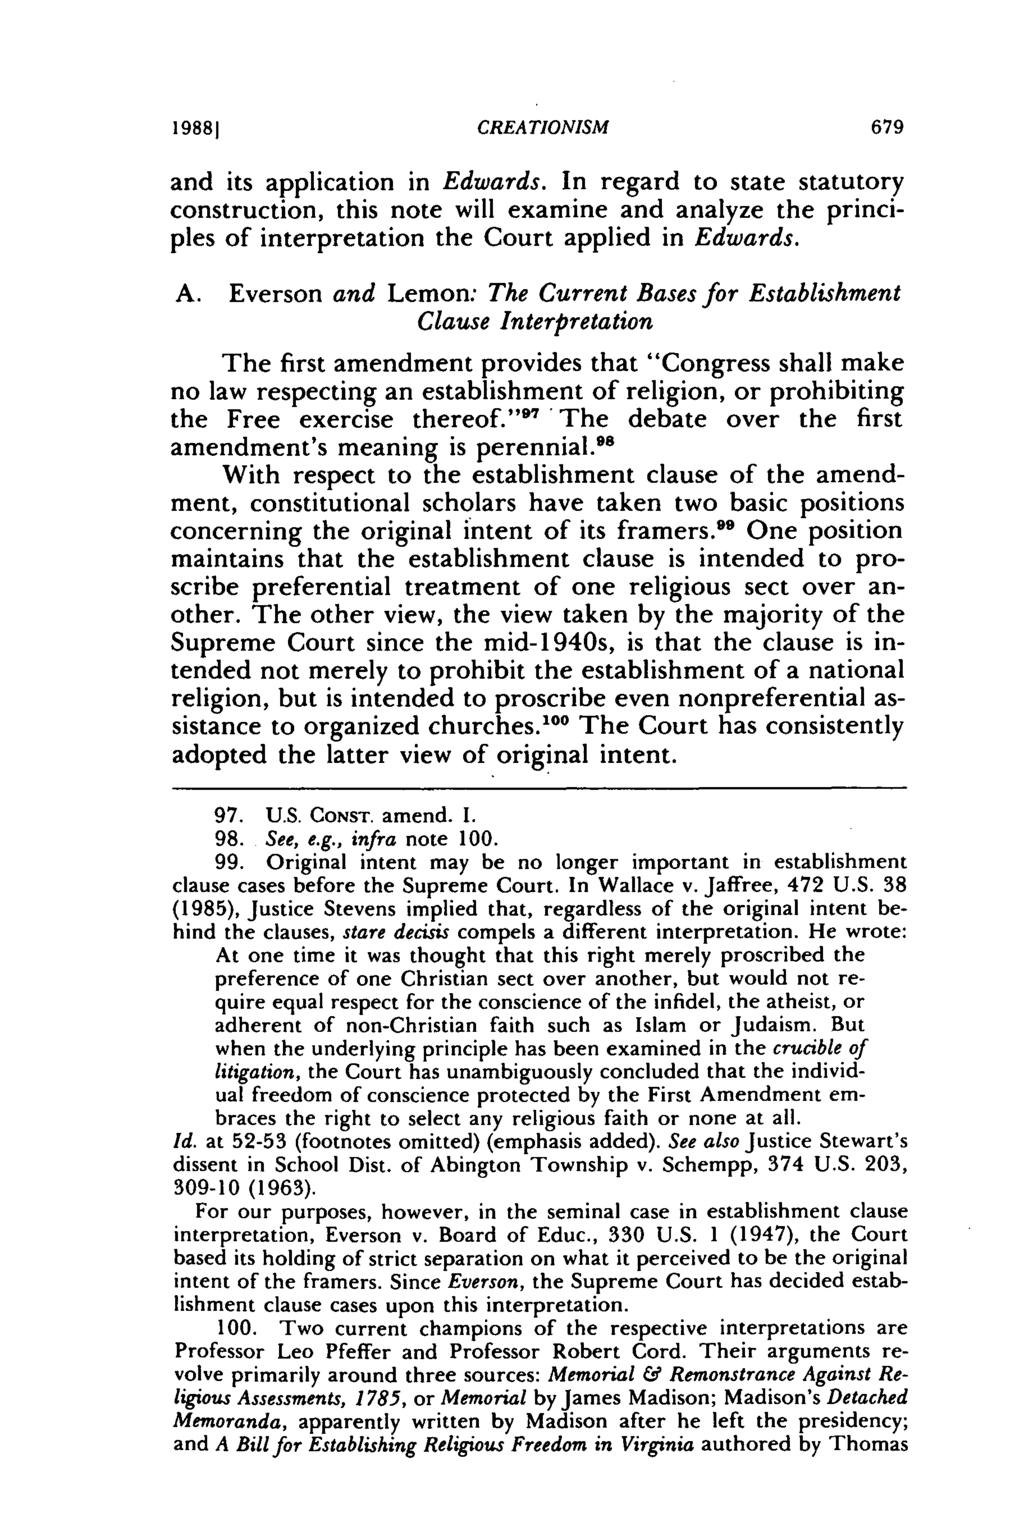 19881 CREATIONISM and its application in Edwards. In regard to state statutory construction, this note will examine and analyze the principles of interpretation the Court applied in Edwards. A.